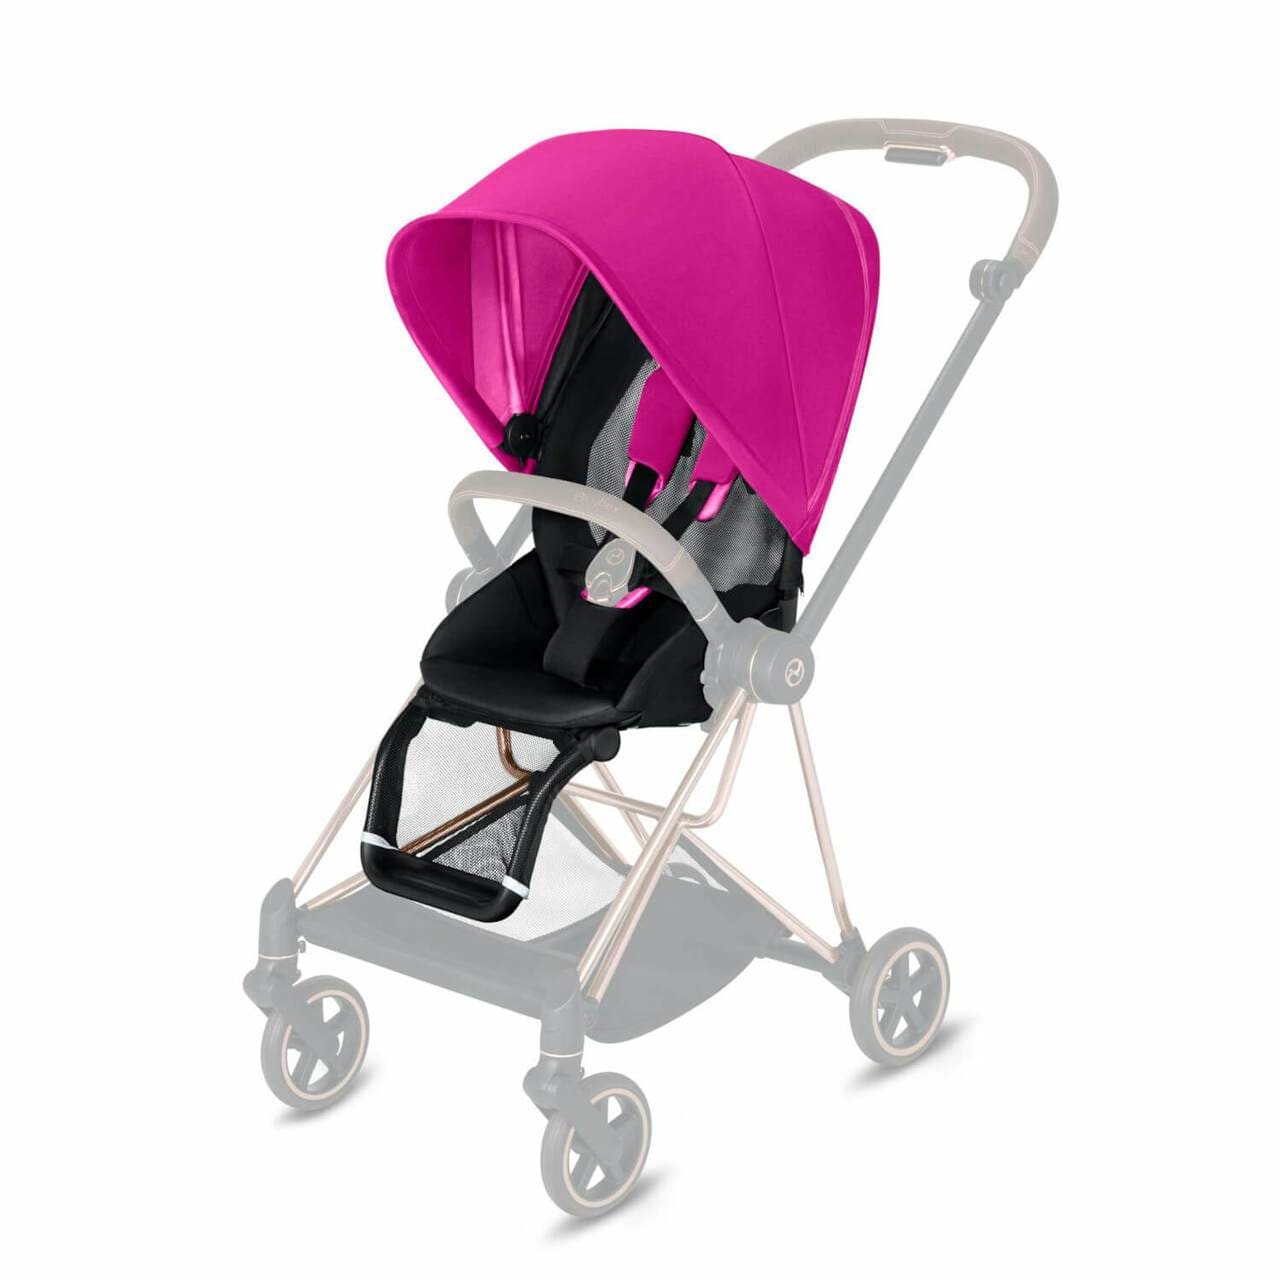 CYBEX Mios 3-in-1 Travel System Seat Pack – Fancy Pink 519003711 4058511709536